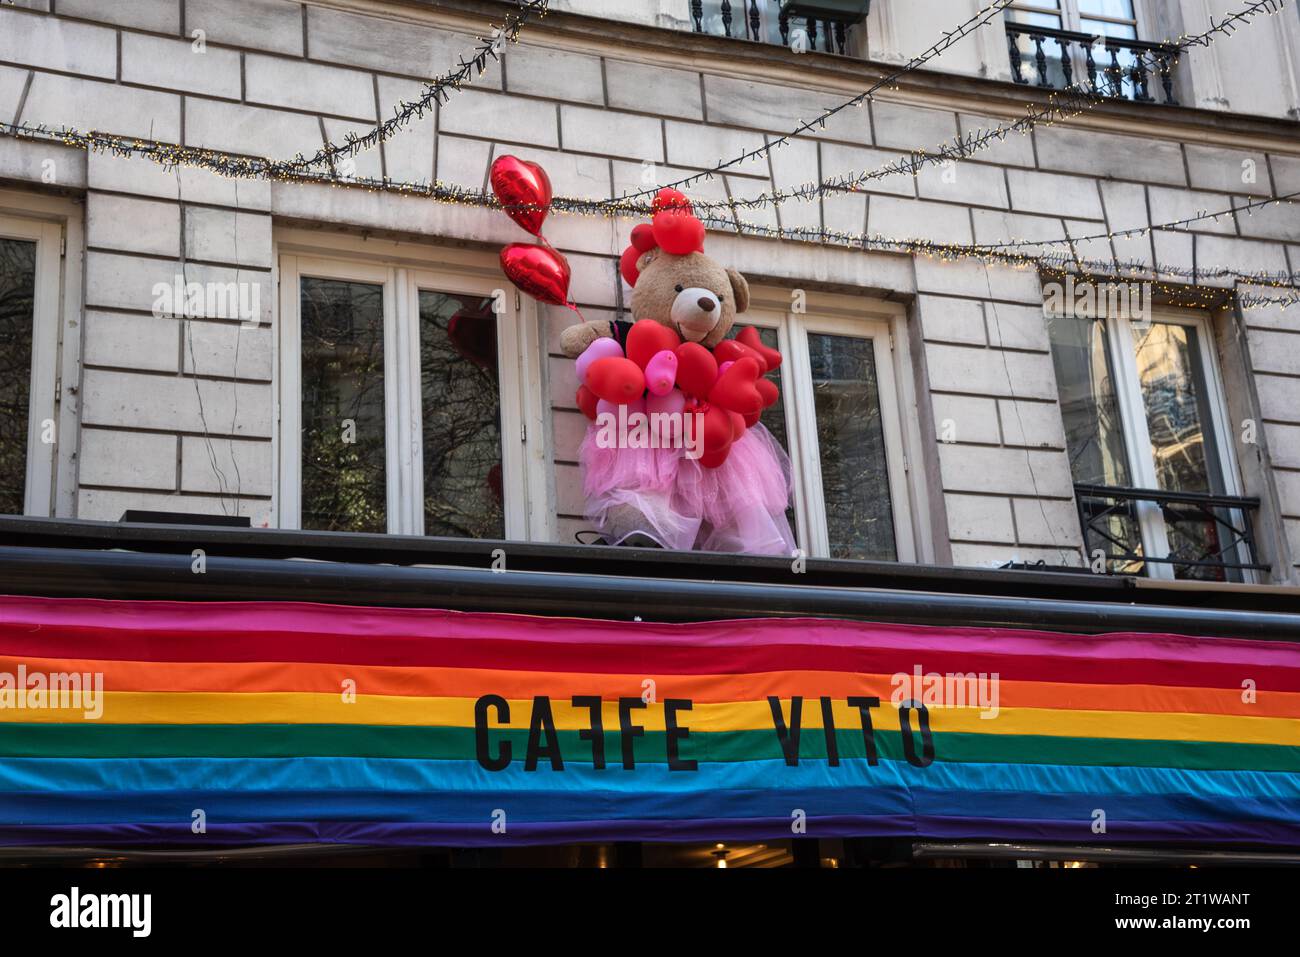 Paris, France - February 21, 2023: After Valentine's Day. Caffe Vito restaurant at Rue des Archives in Marais decorated with teddy bear over lgbt flag Stock Photo